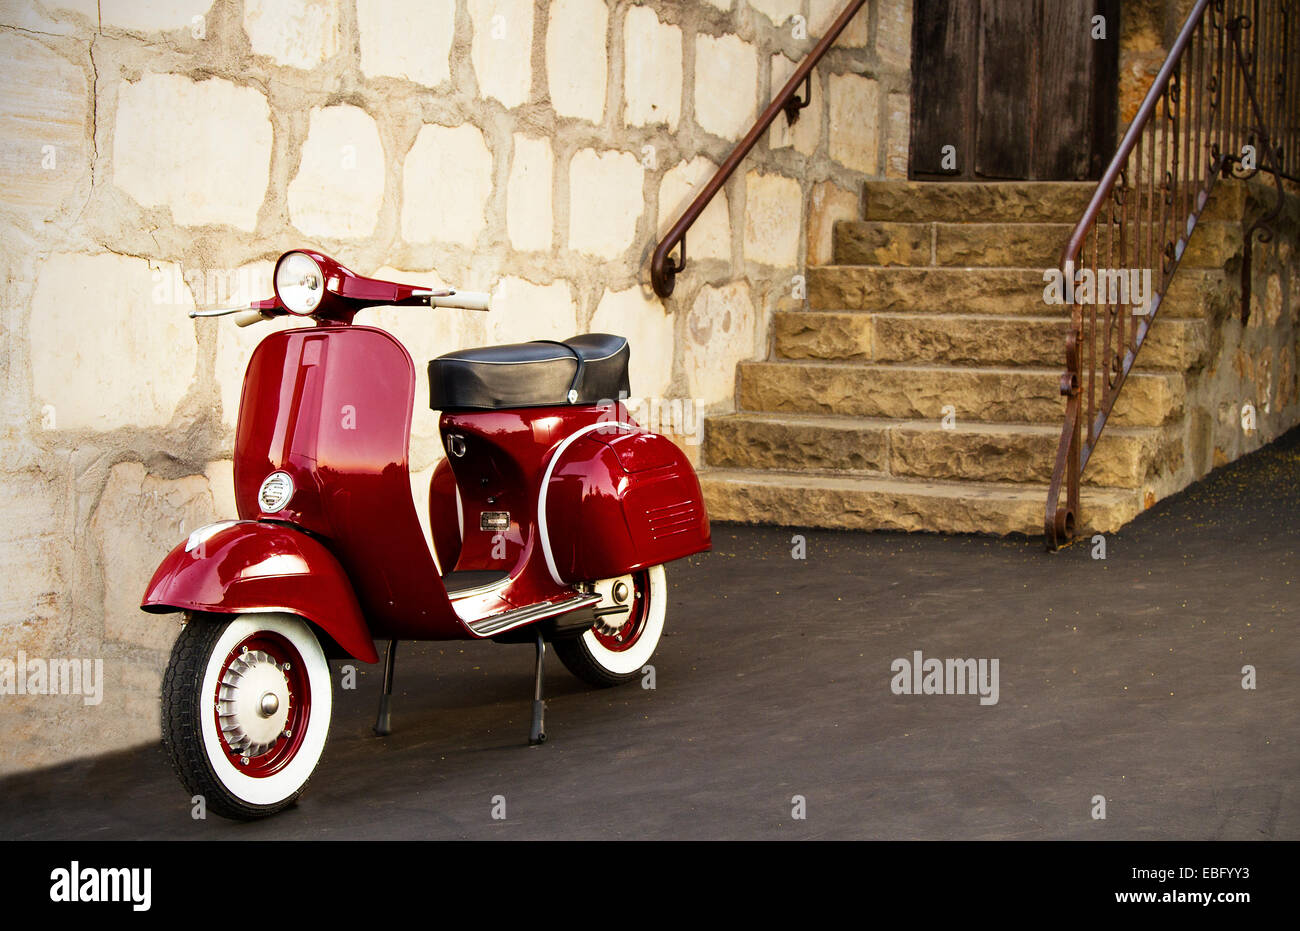 1968 red Vespa scooter outside a rustic building Stock Photo